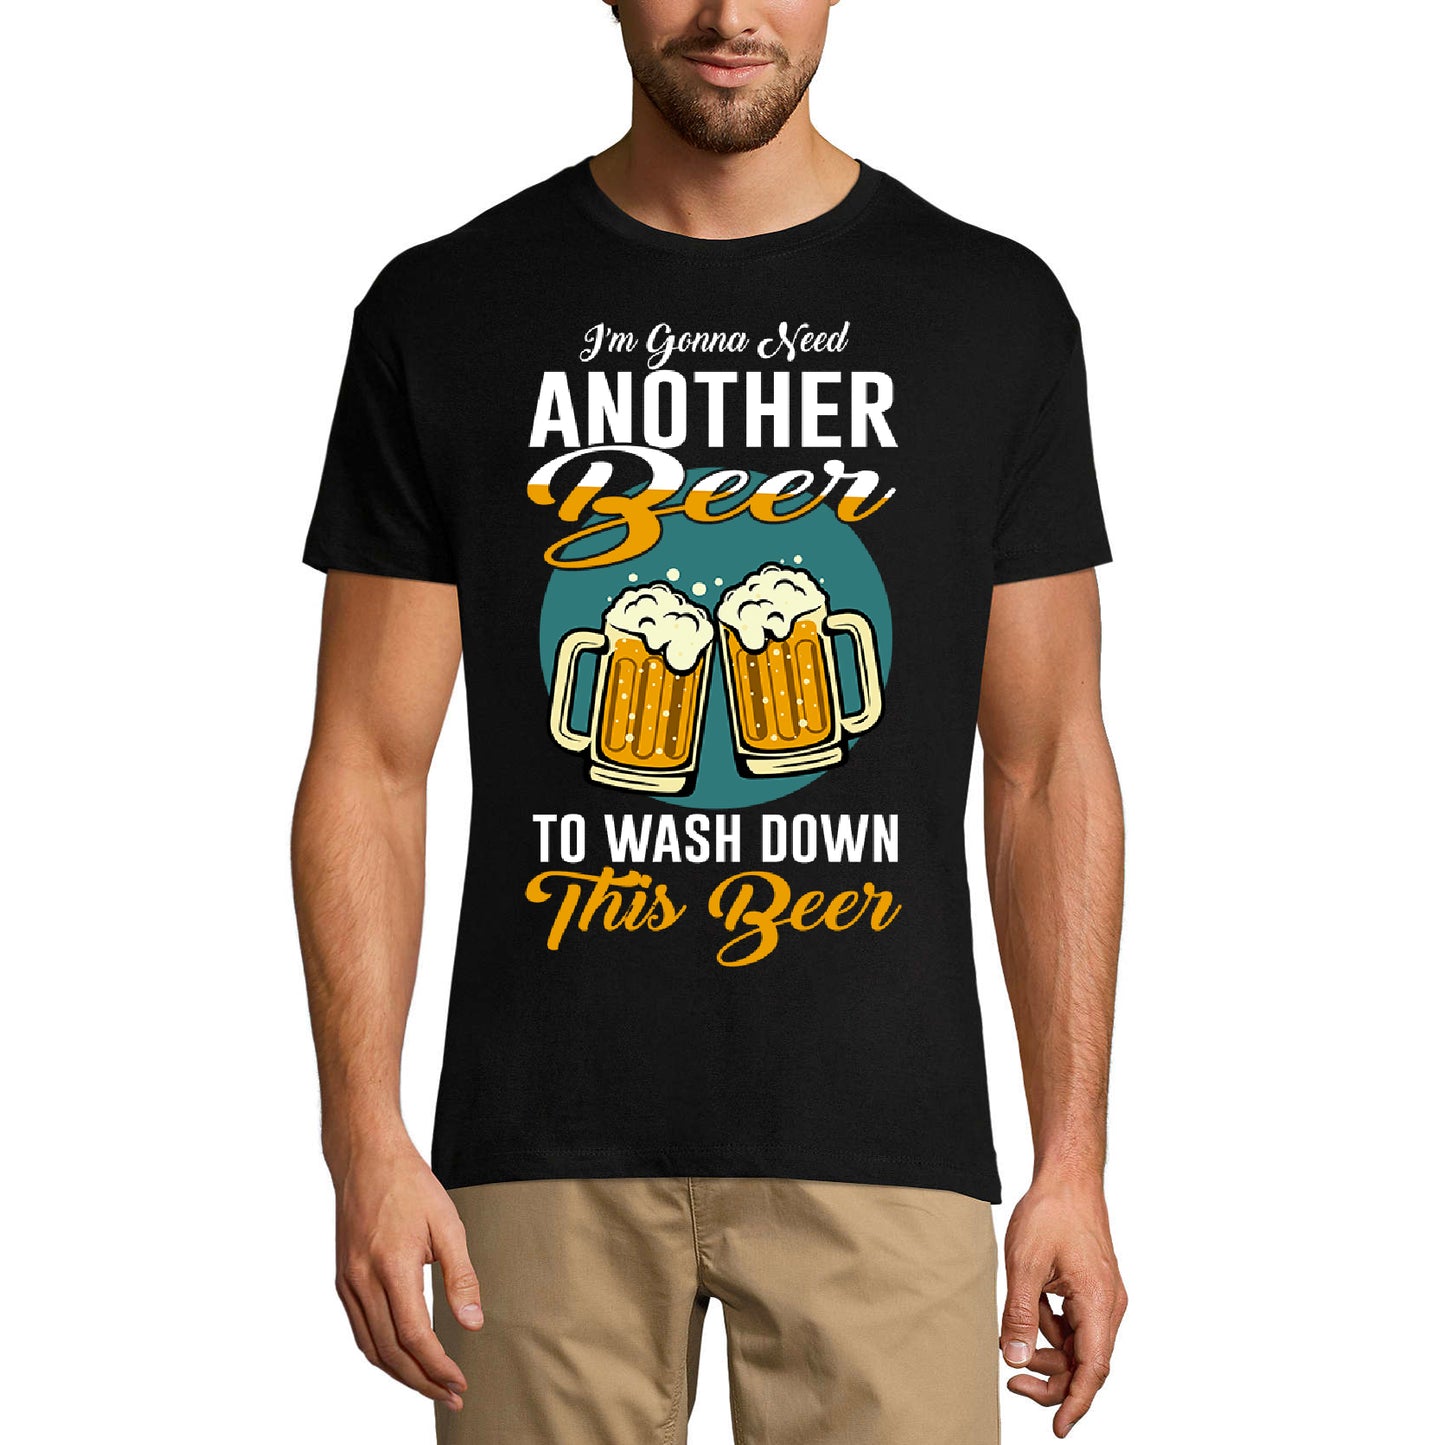 ULTRABASIC Men's Humor T-Shirt I'm Gonna Need Another Beer to Wash Down This Beer - Funny Saying Tee Shirt